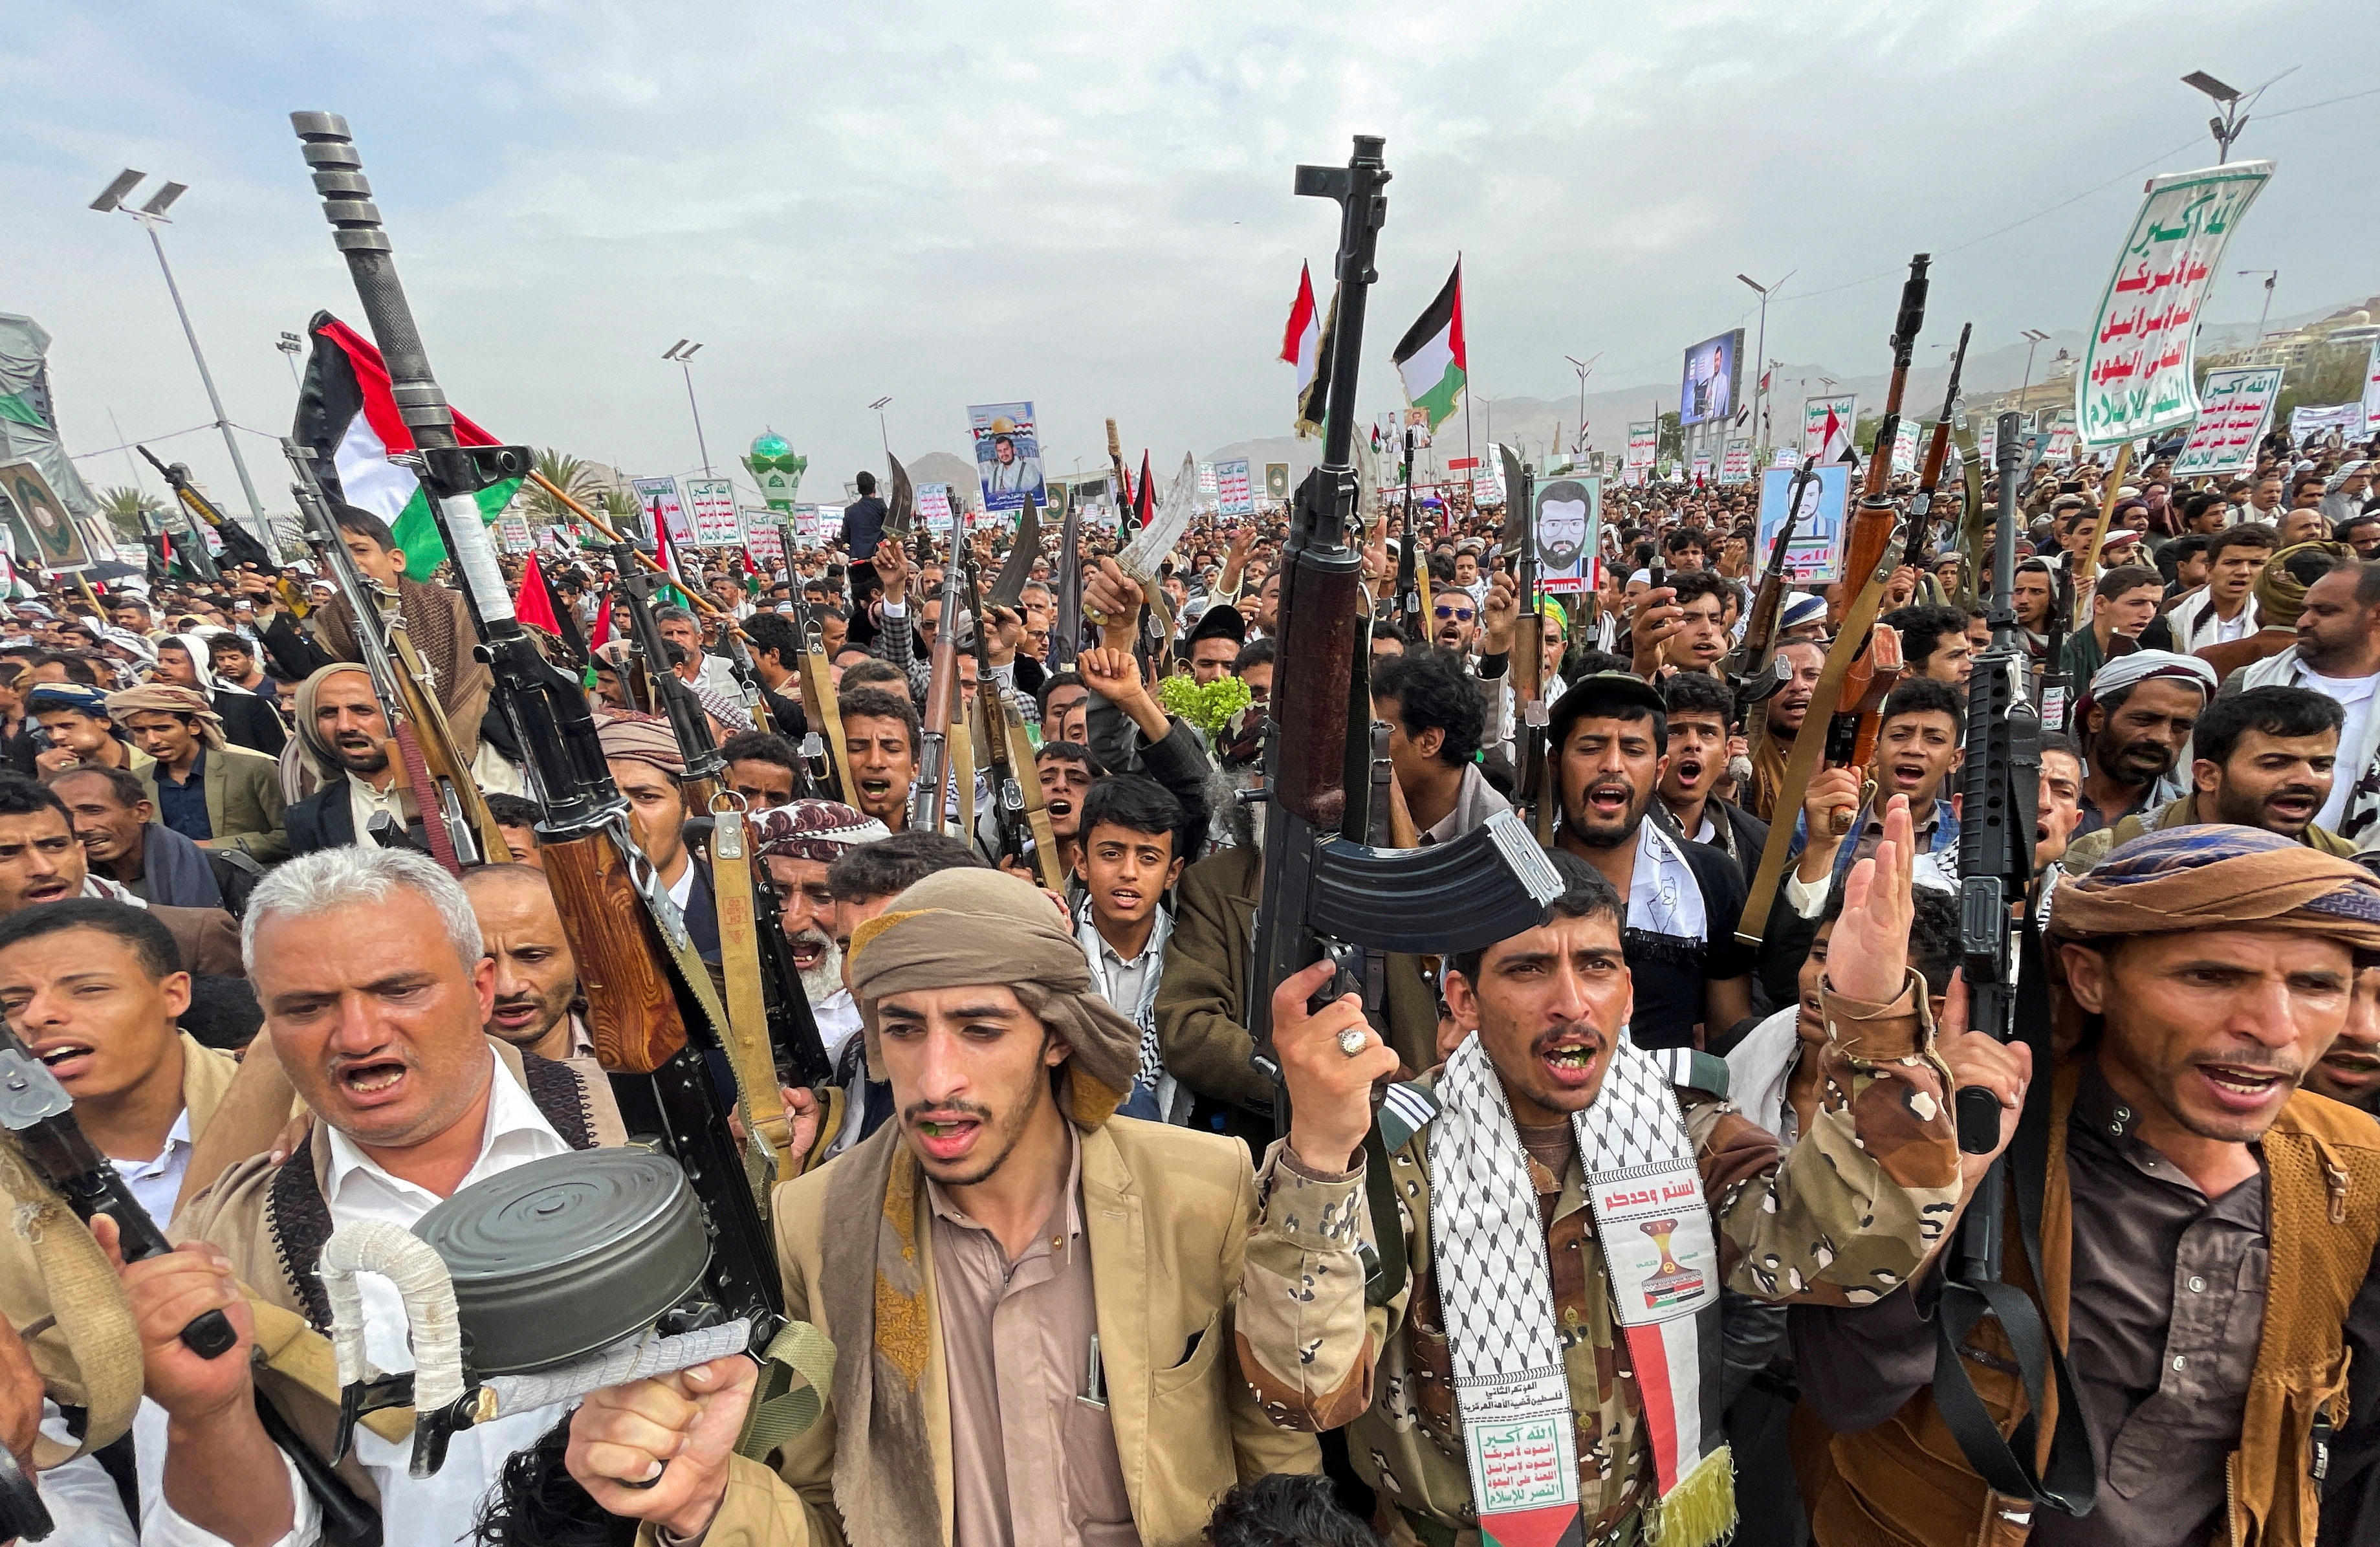 Demonstration in solidarity with Palestinians in the Gaza Strip, in Sanaa